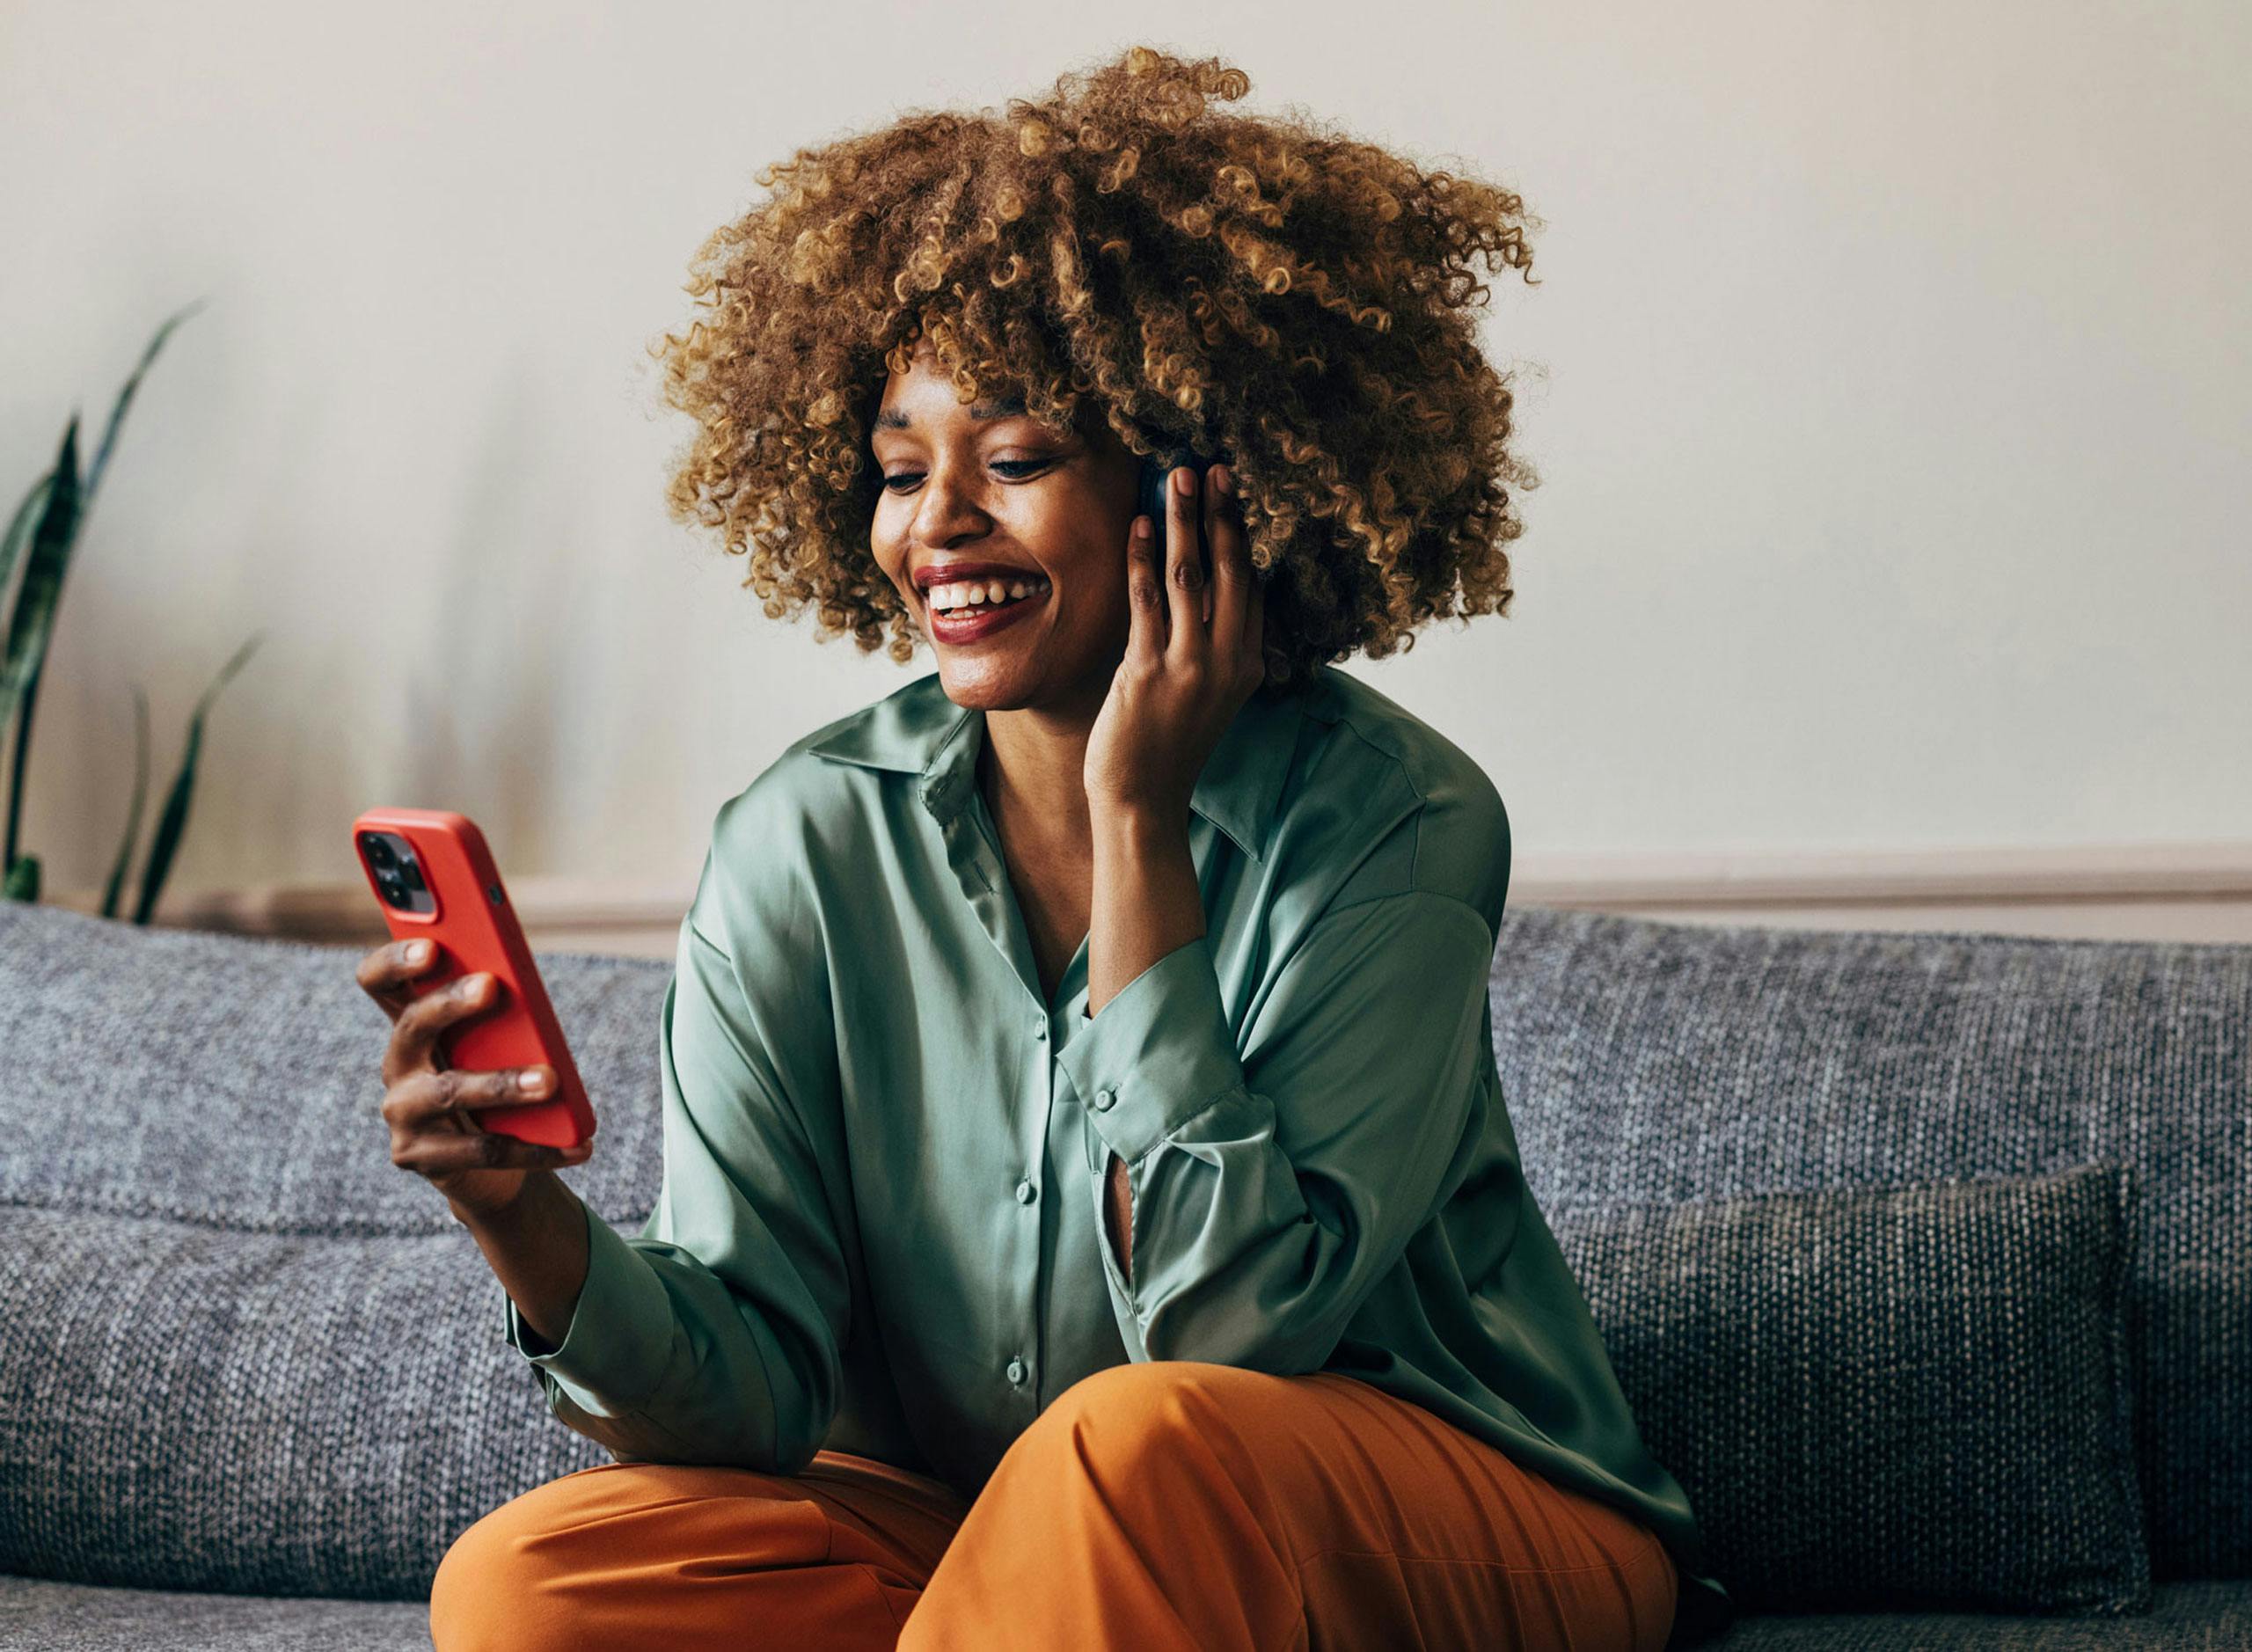 Woman sitting on the sofa looking at her phone while smiling